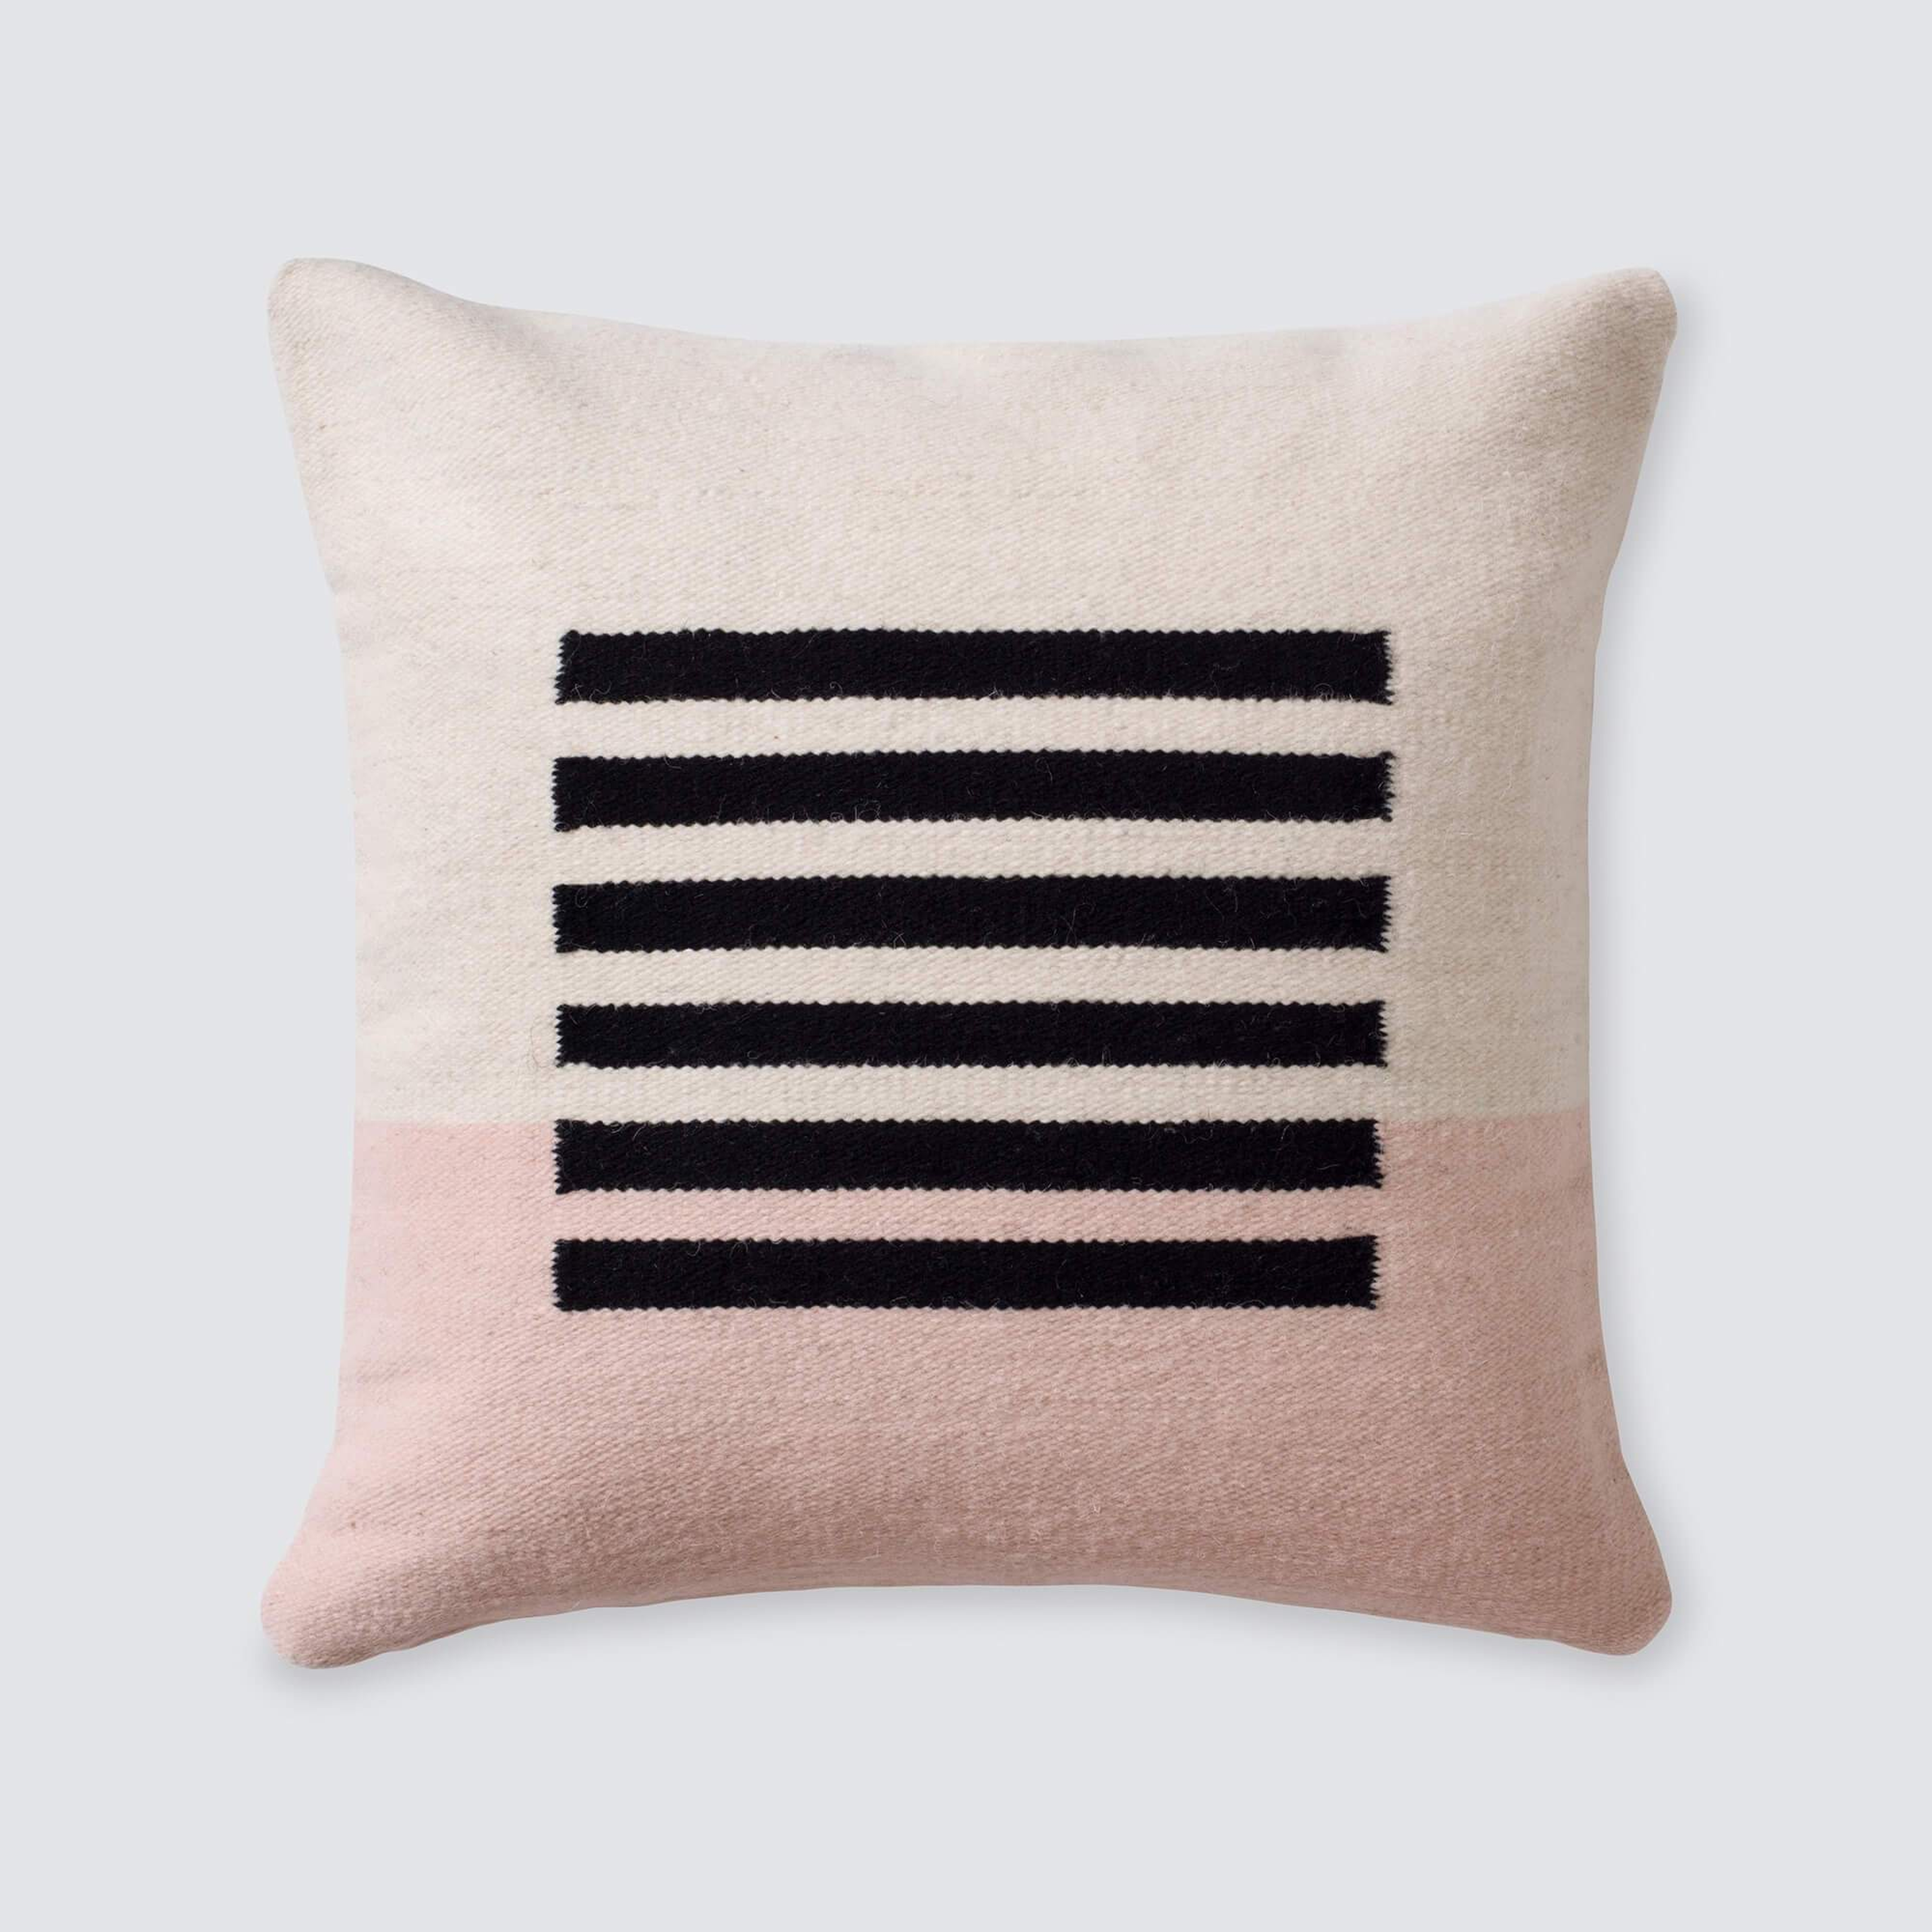 Cuño Pillow By The Citizenry - The Citizenry